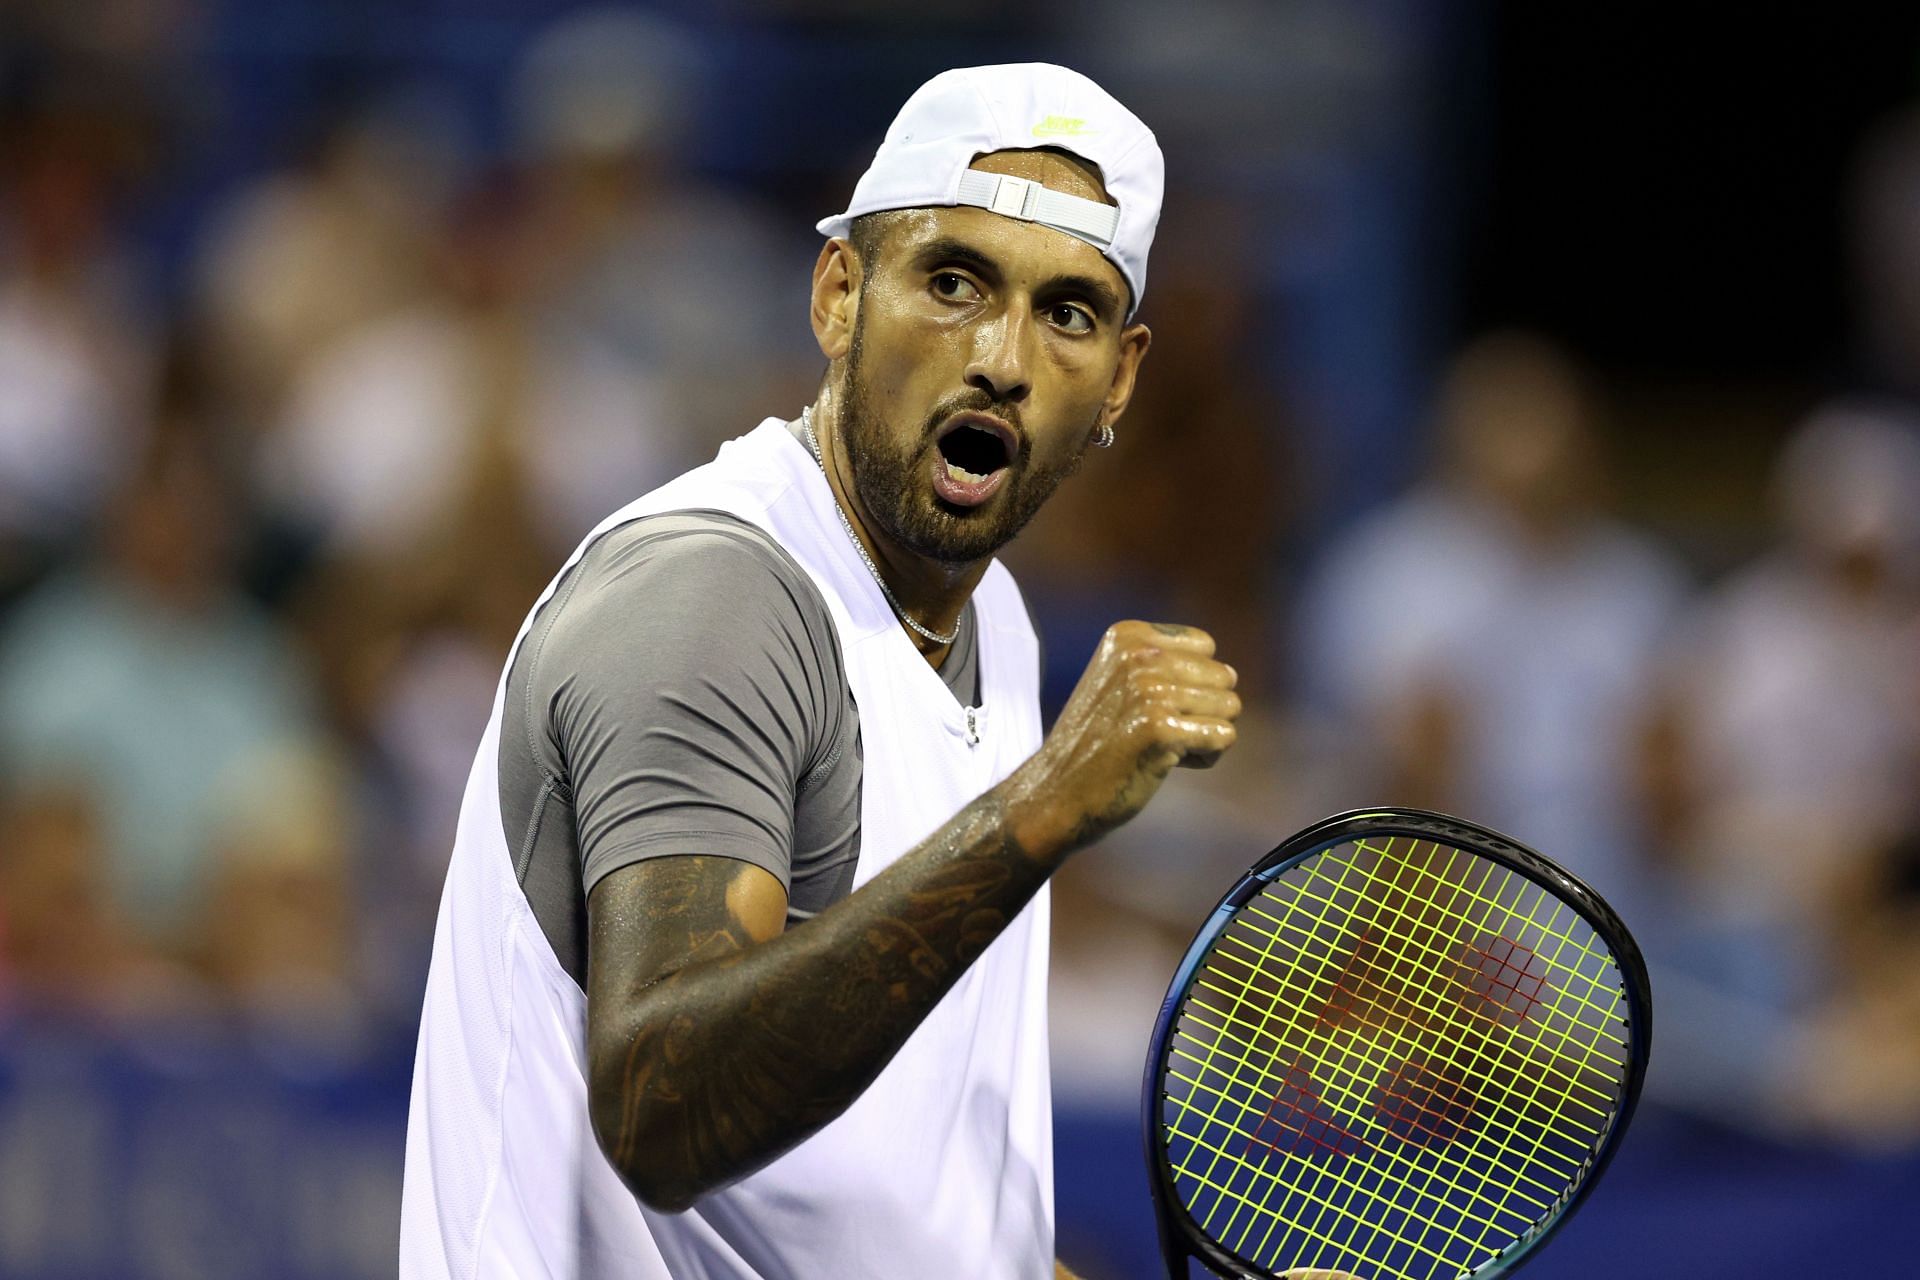 Nick Kyrgios in action at the 2022 Citi Open.